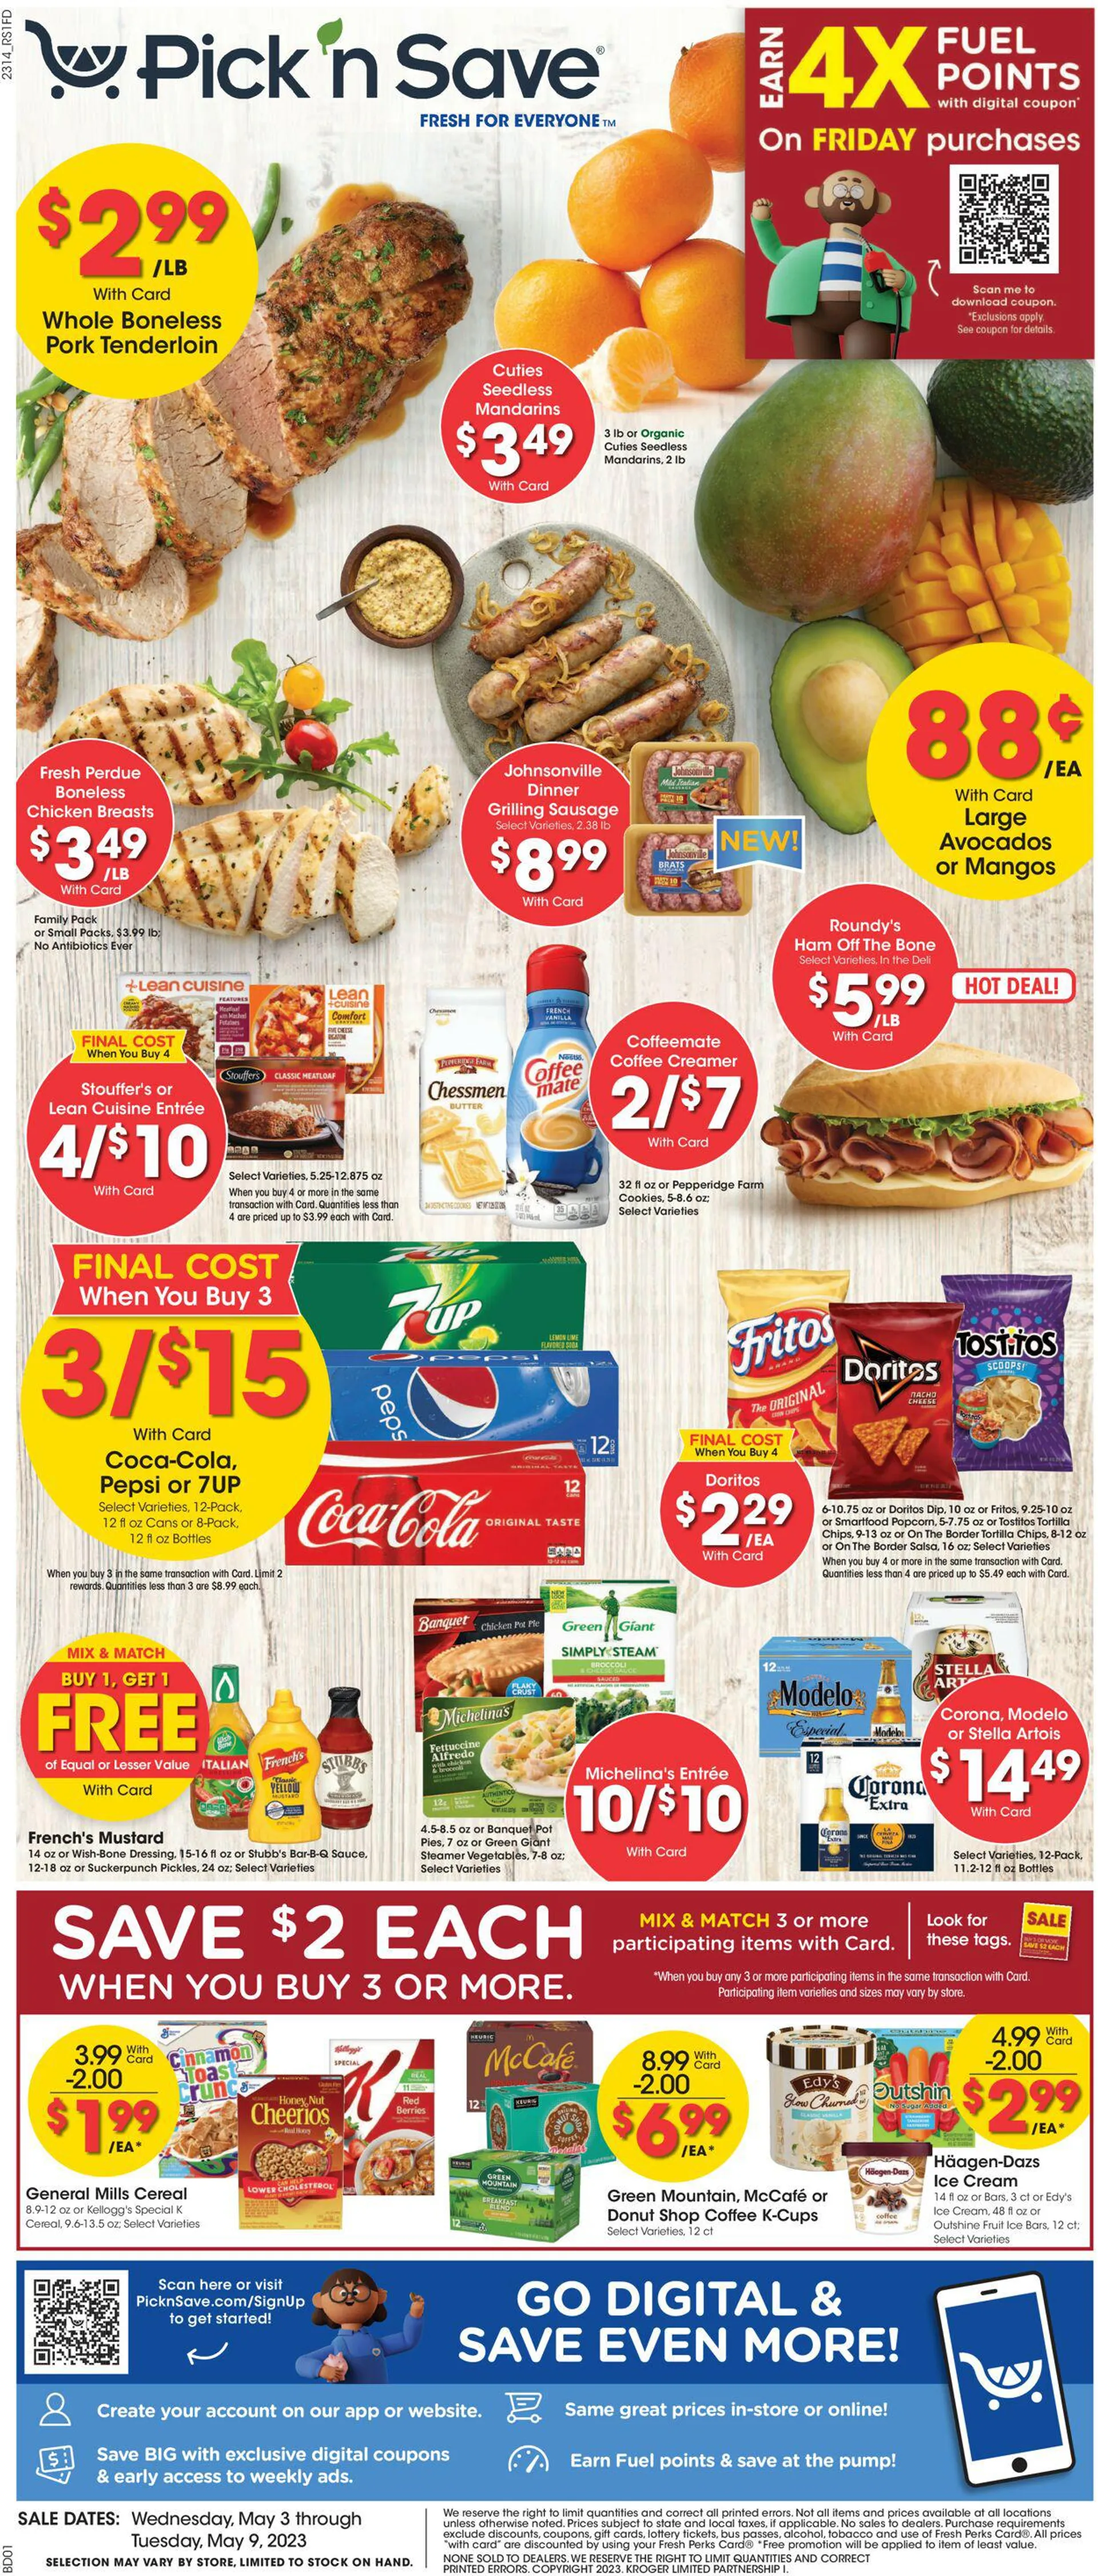 Pick ‘n Save Current weekly ad - 1